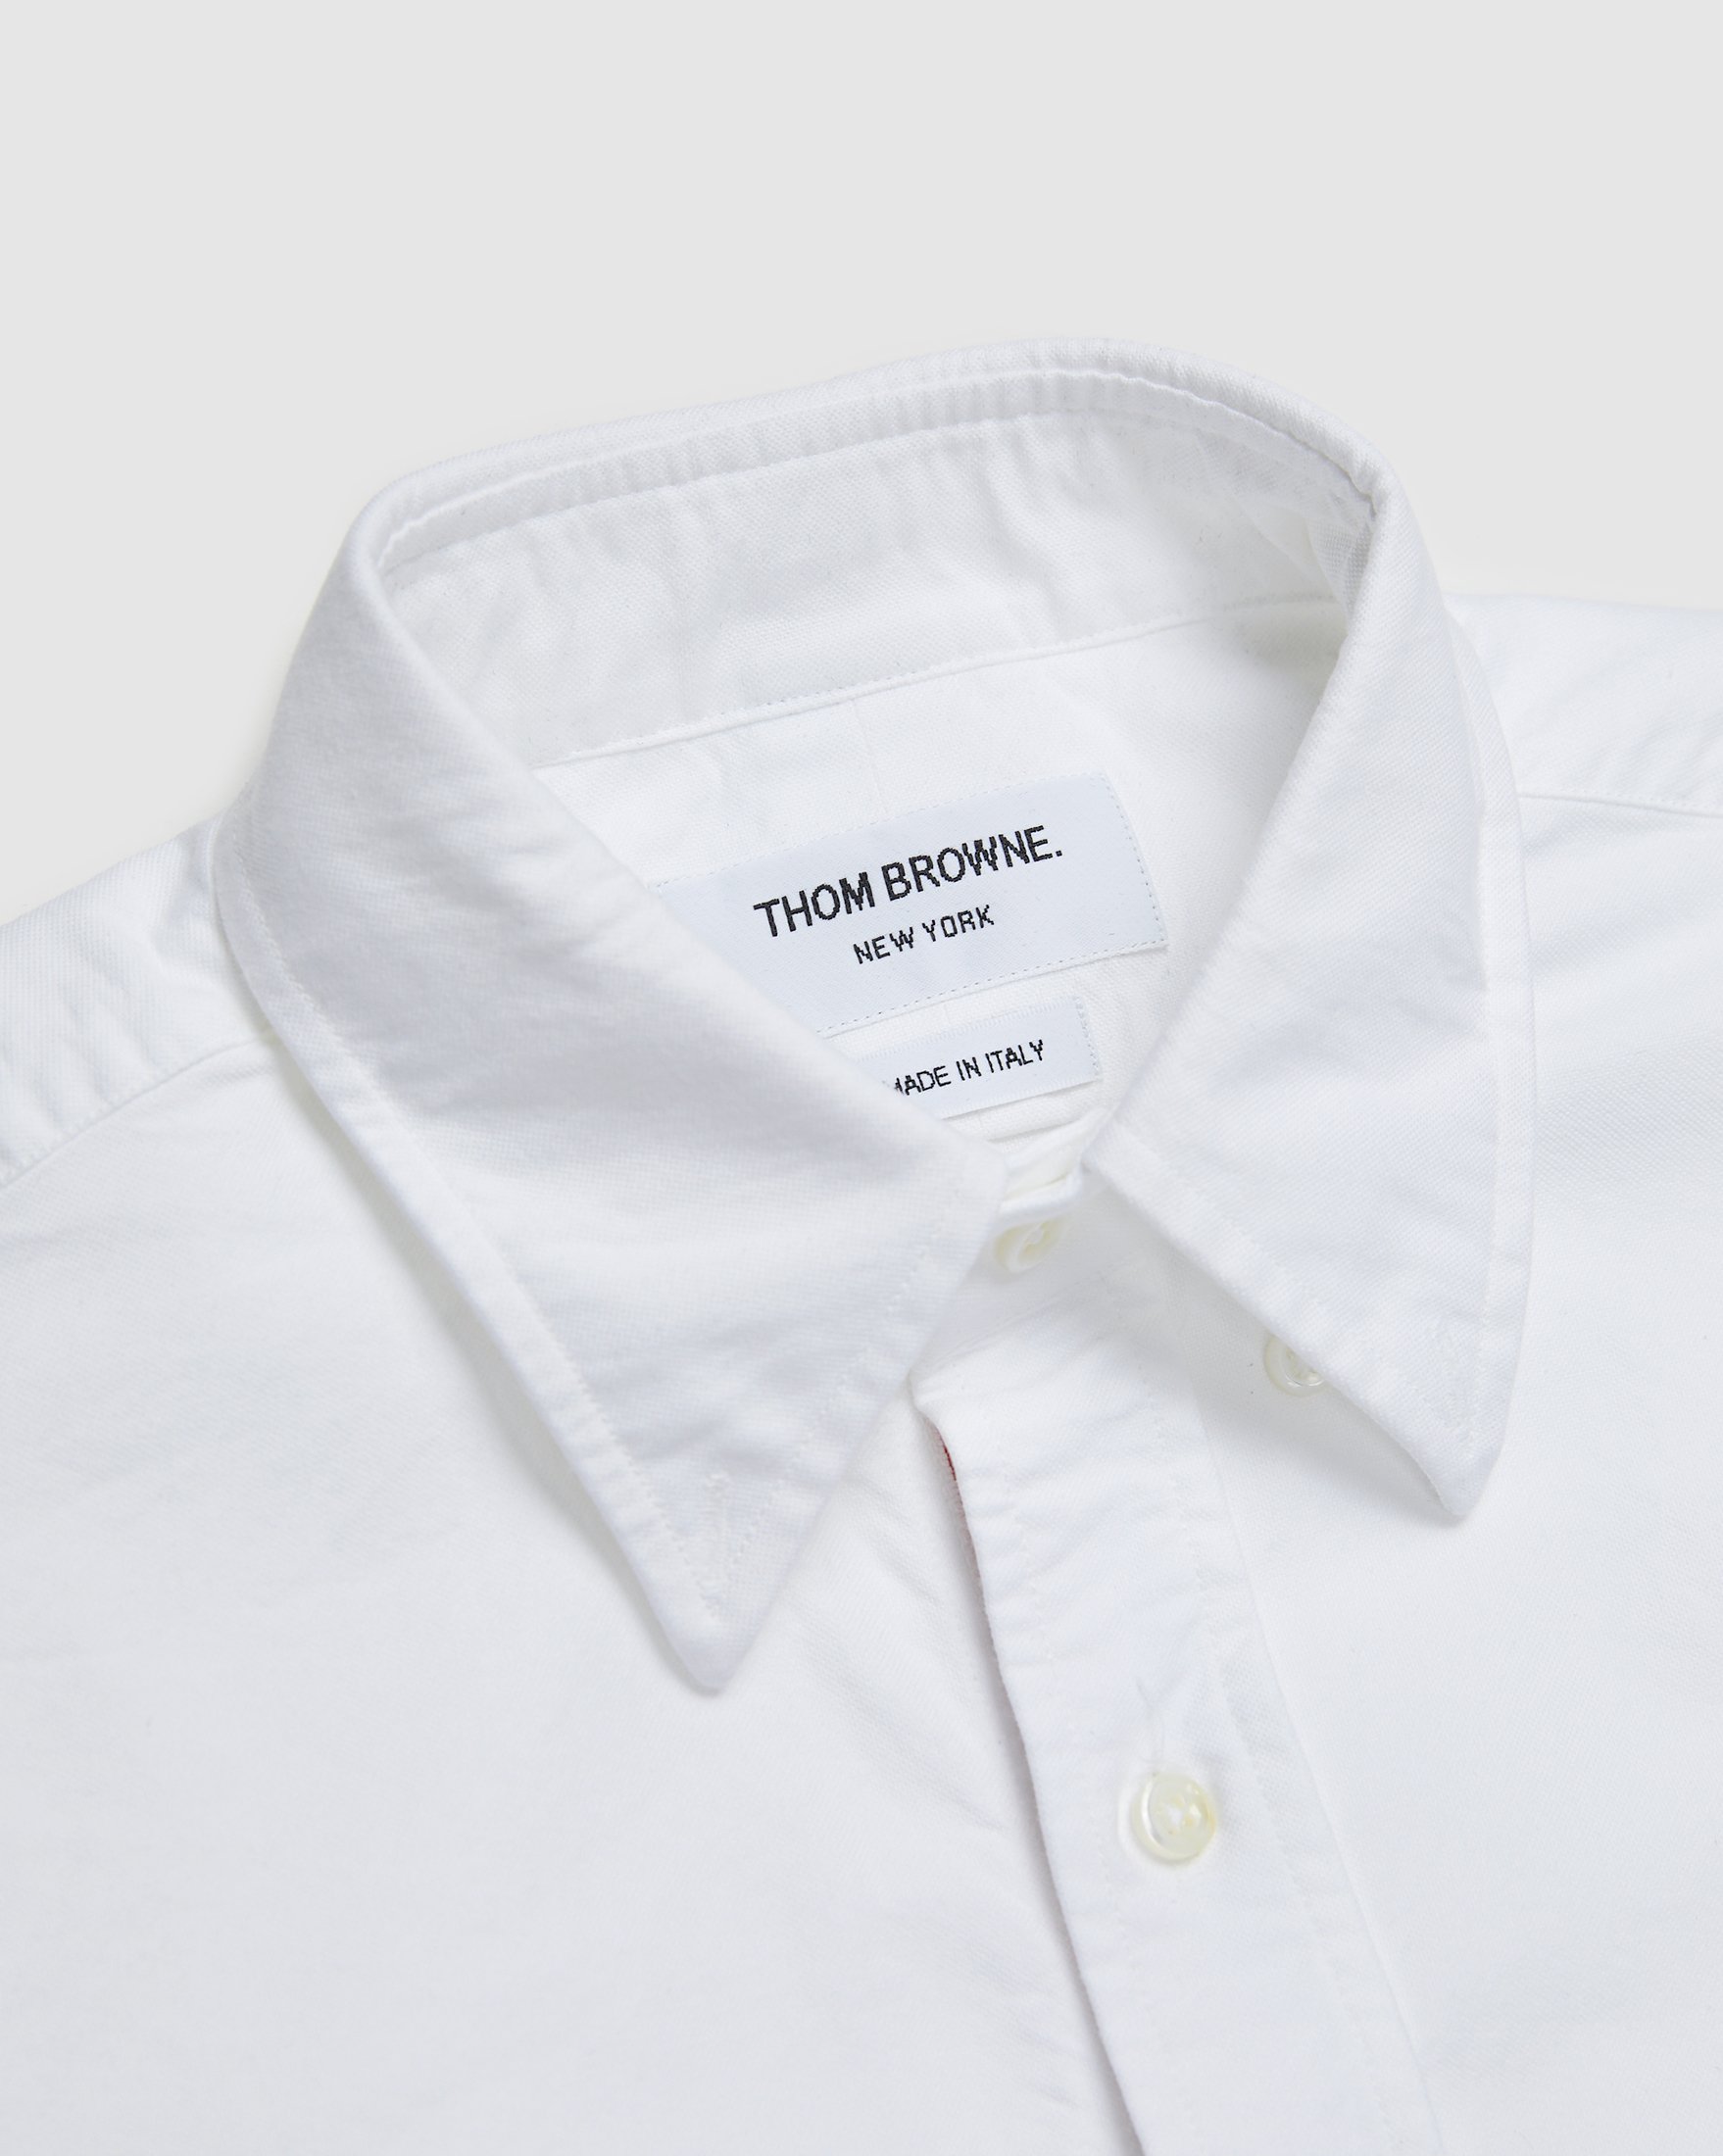 Colette Mon Amour x Thom Browne - White Peace Classic Shirt - Clothing - White - Image 3